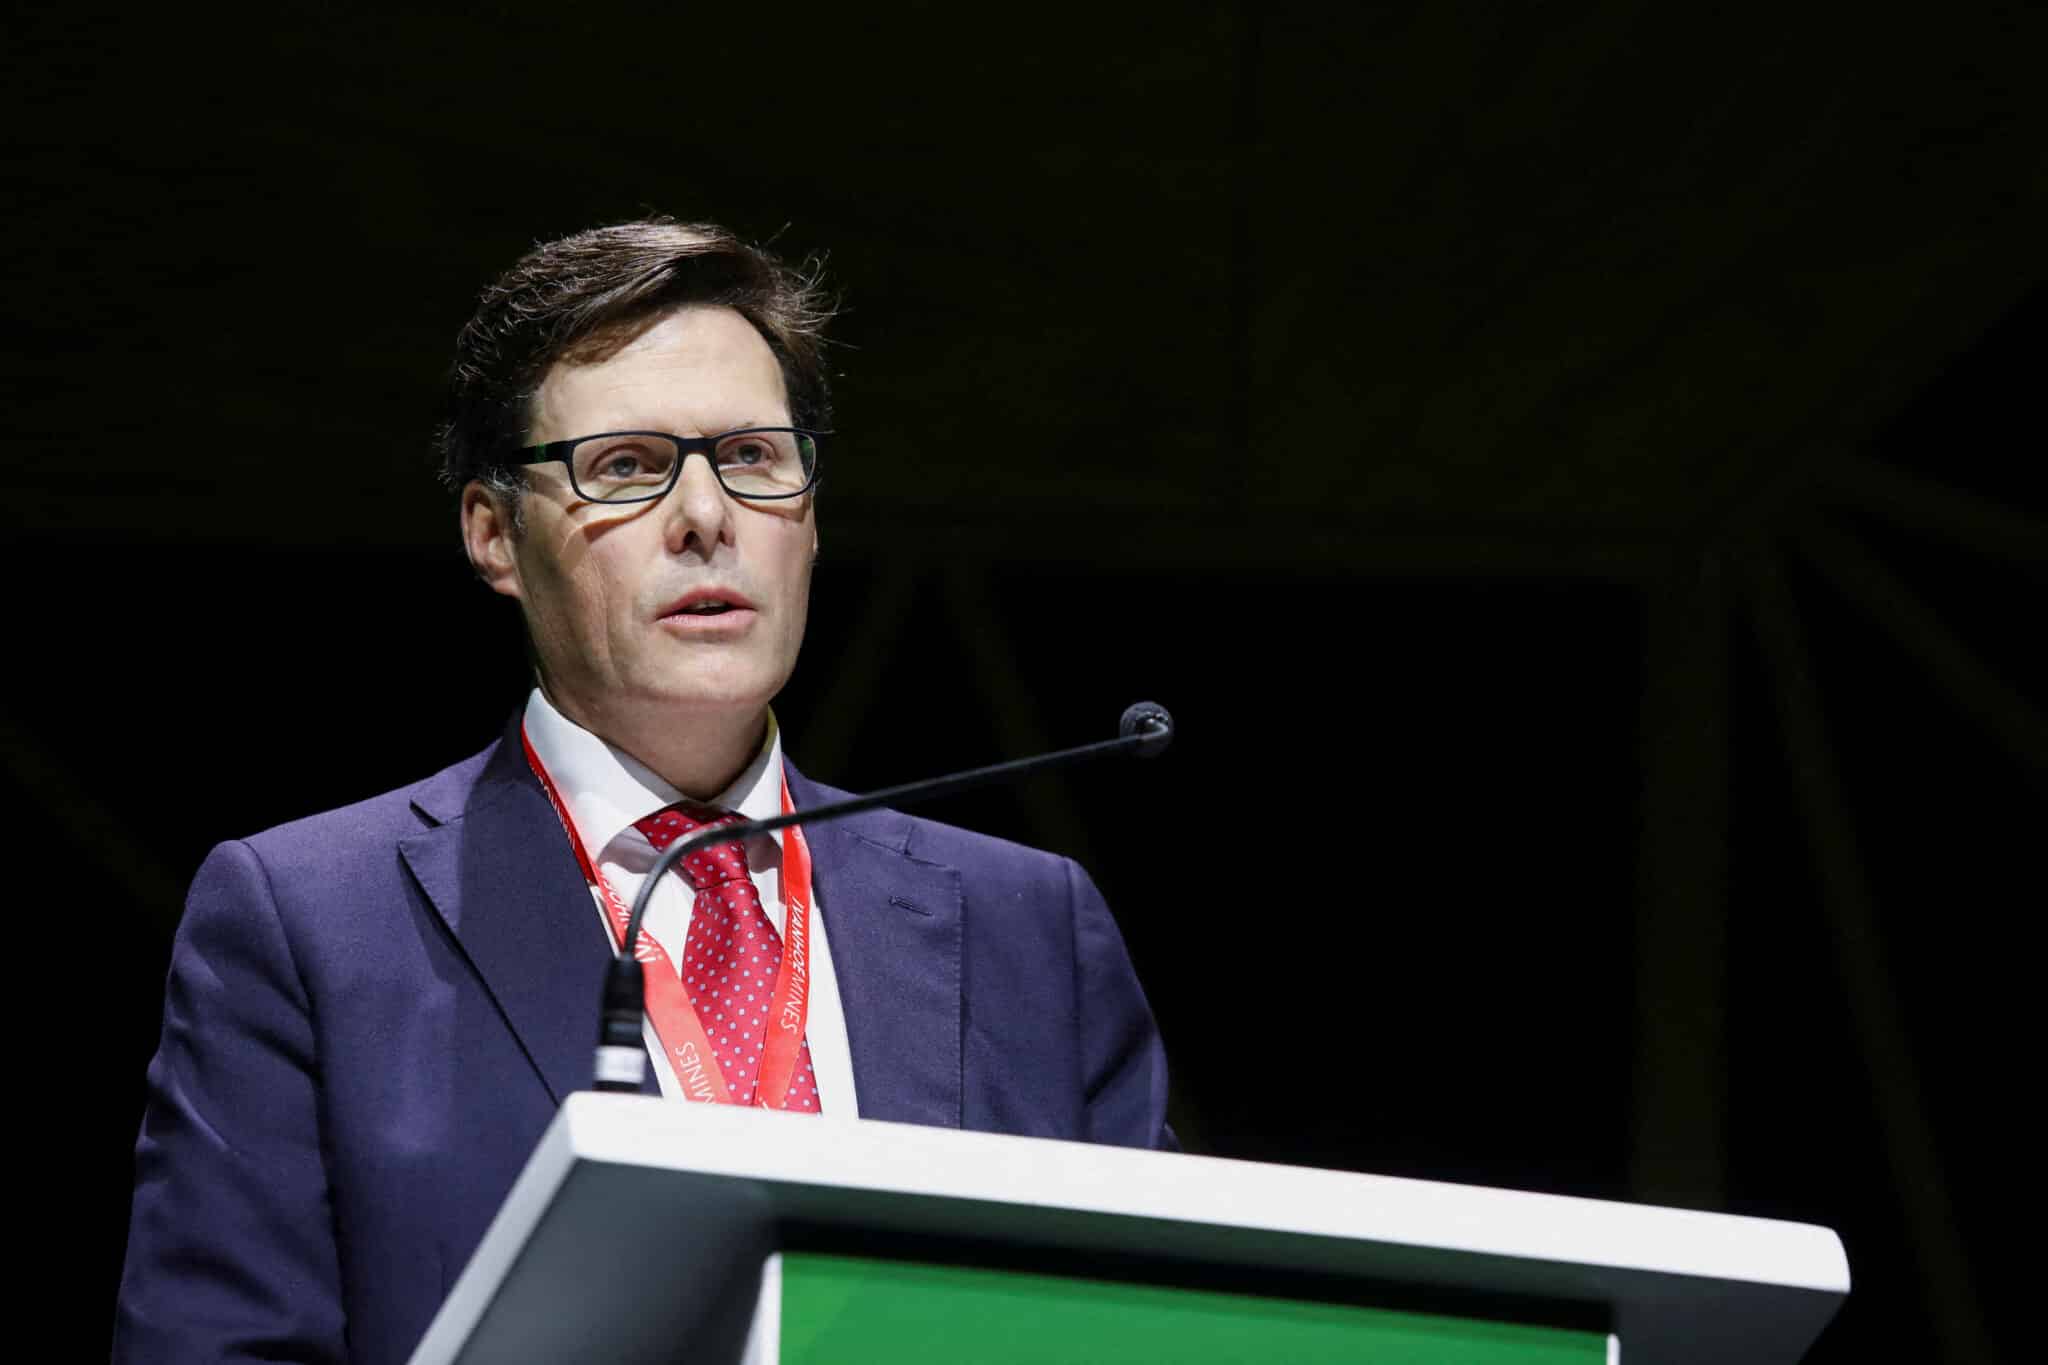 Anglo CEO meets S.Africa mines minister after BHP’s takeover proposal